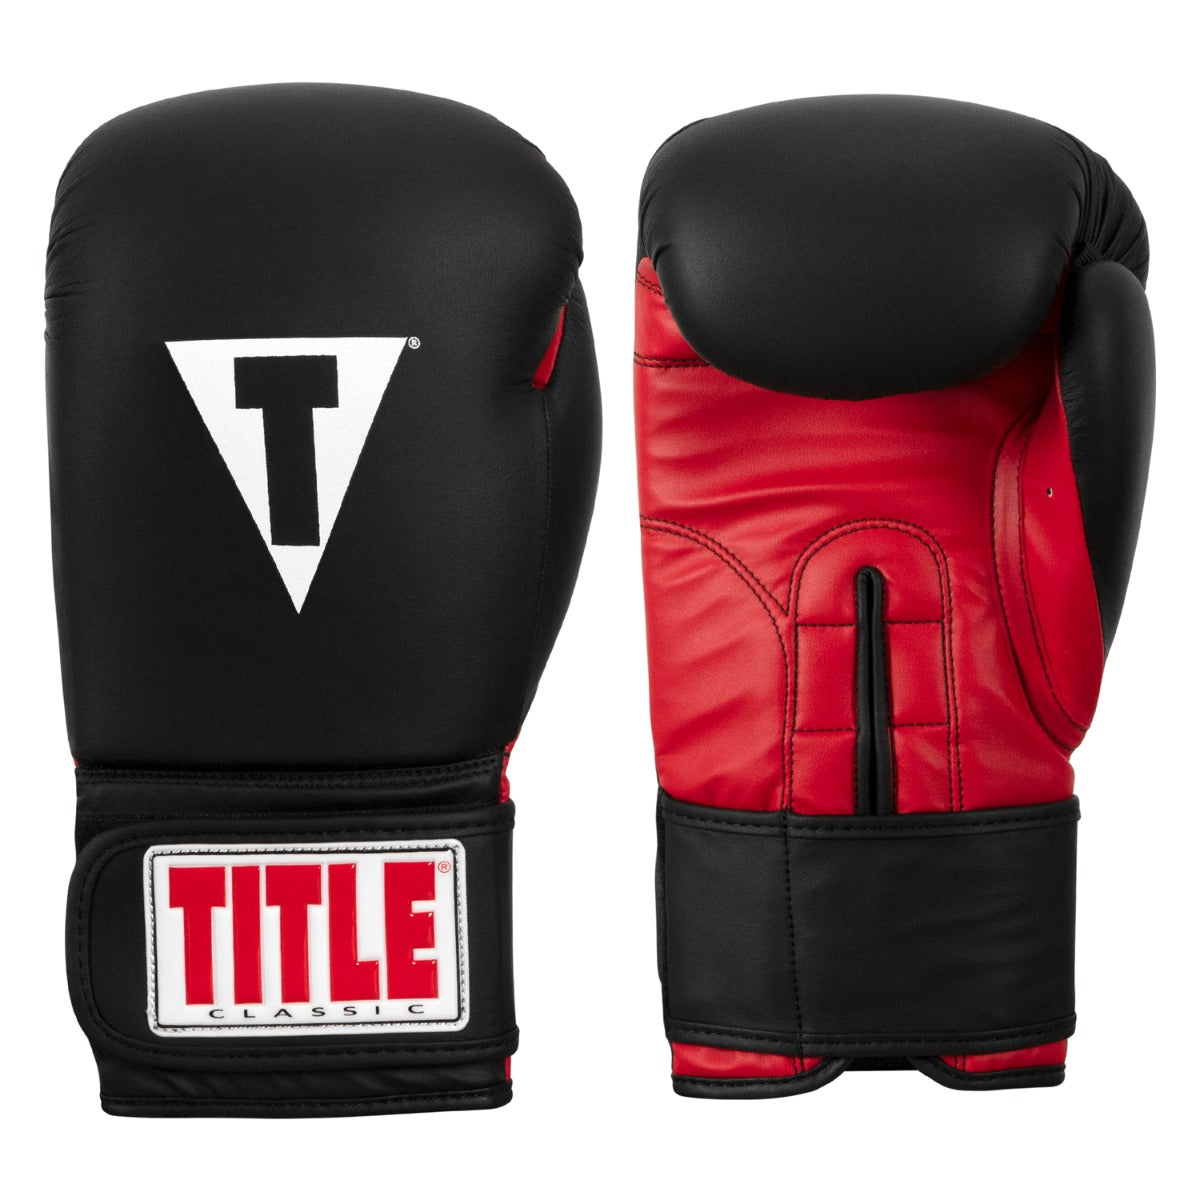 NEW Title Boxing Classic Training Boxing Gloves Black/Red 14oz Large 